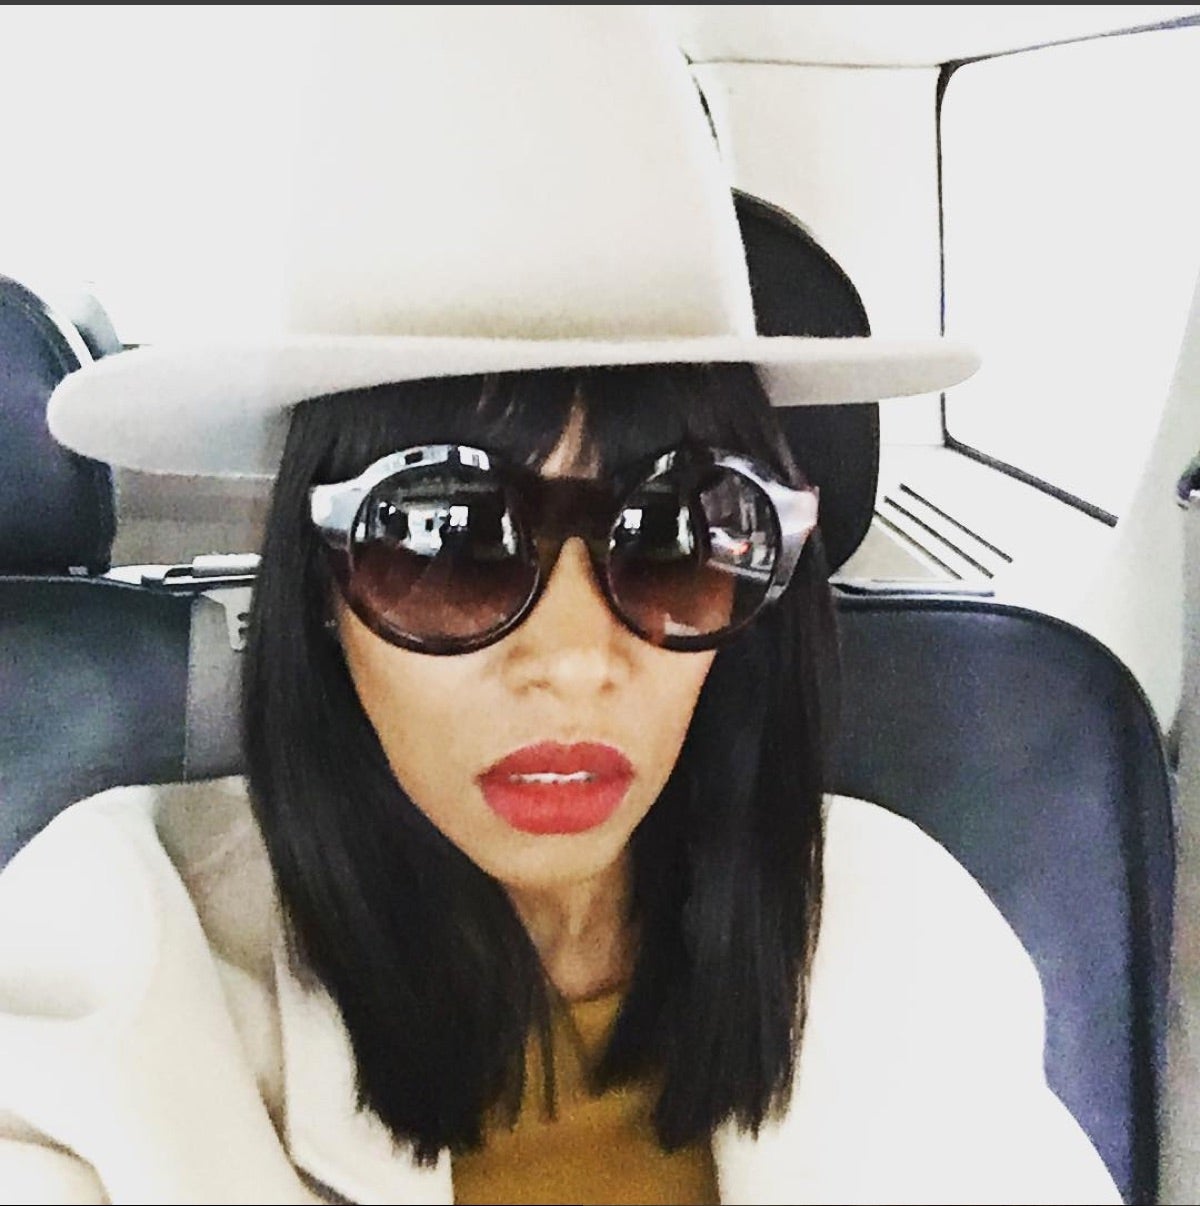 10 Stylish Women Show us That Hats Aren't Just for Bad Hair Days
